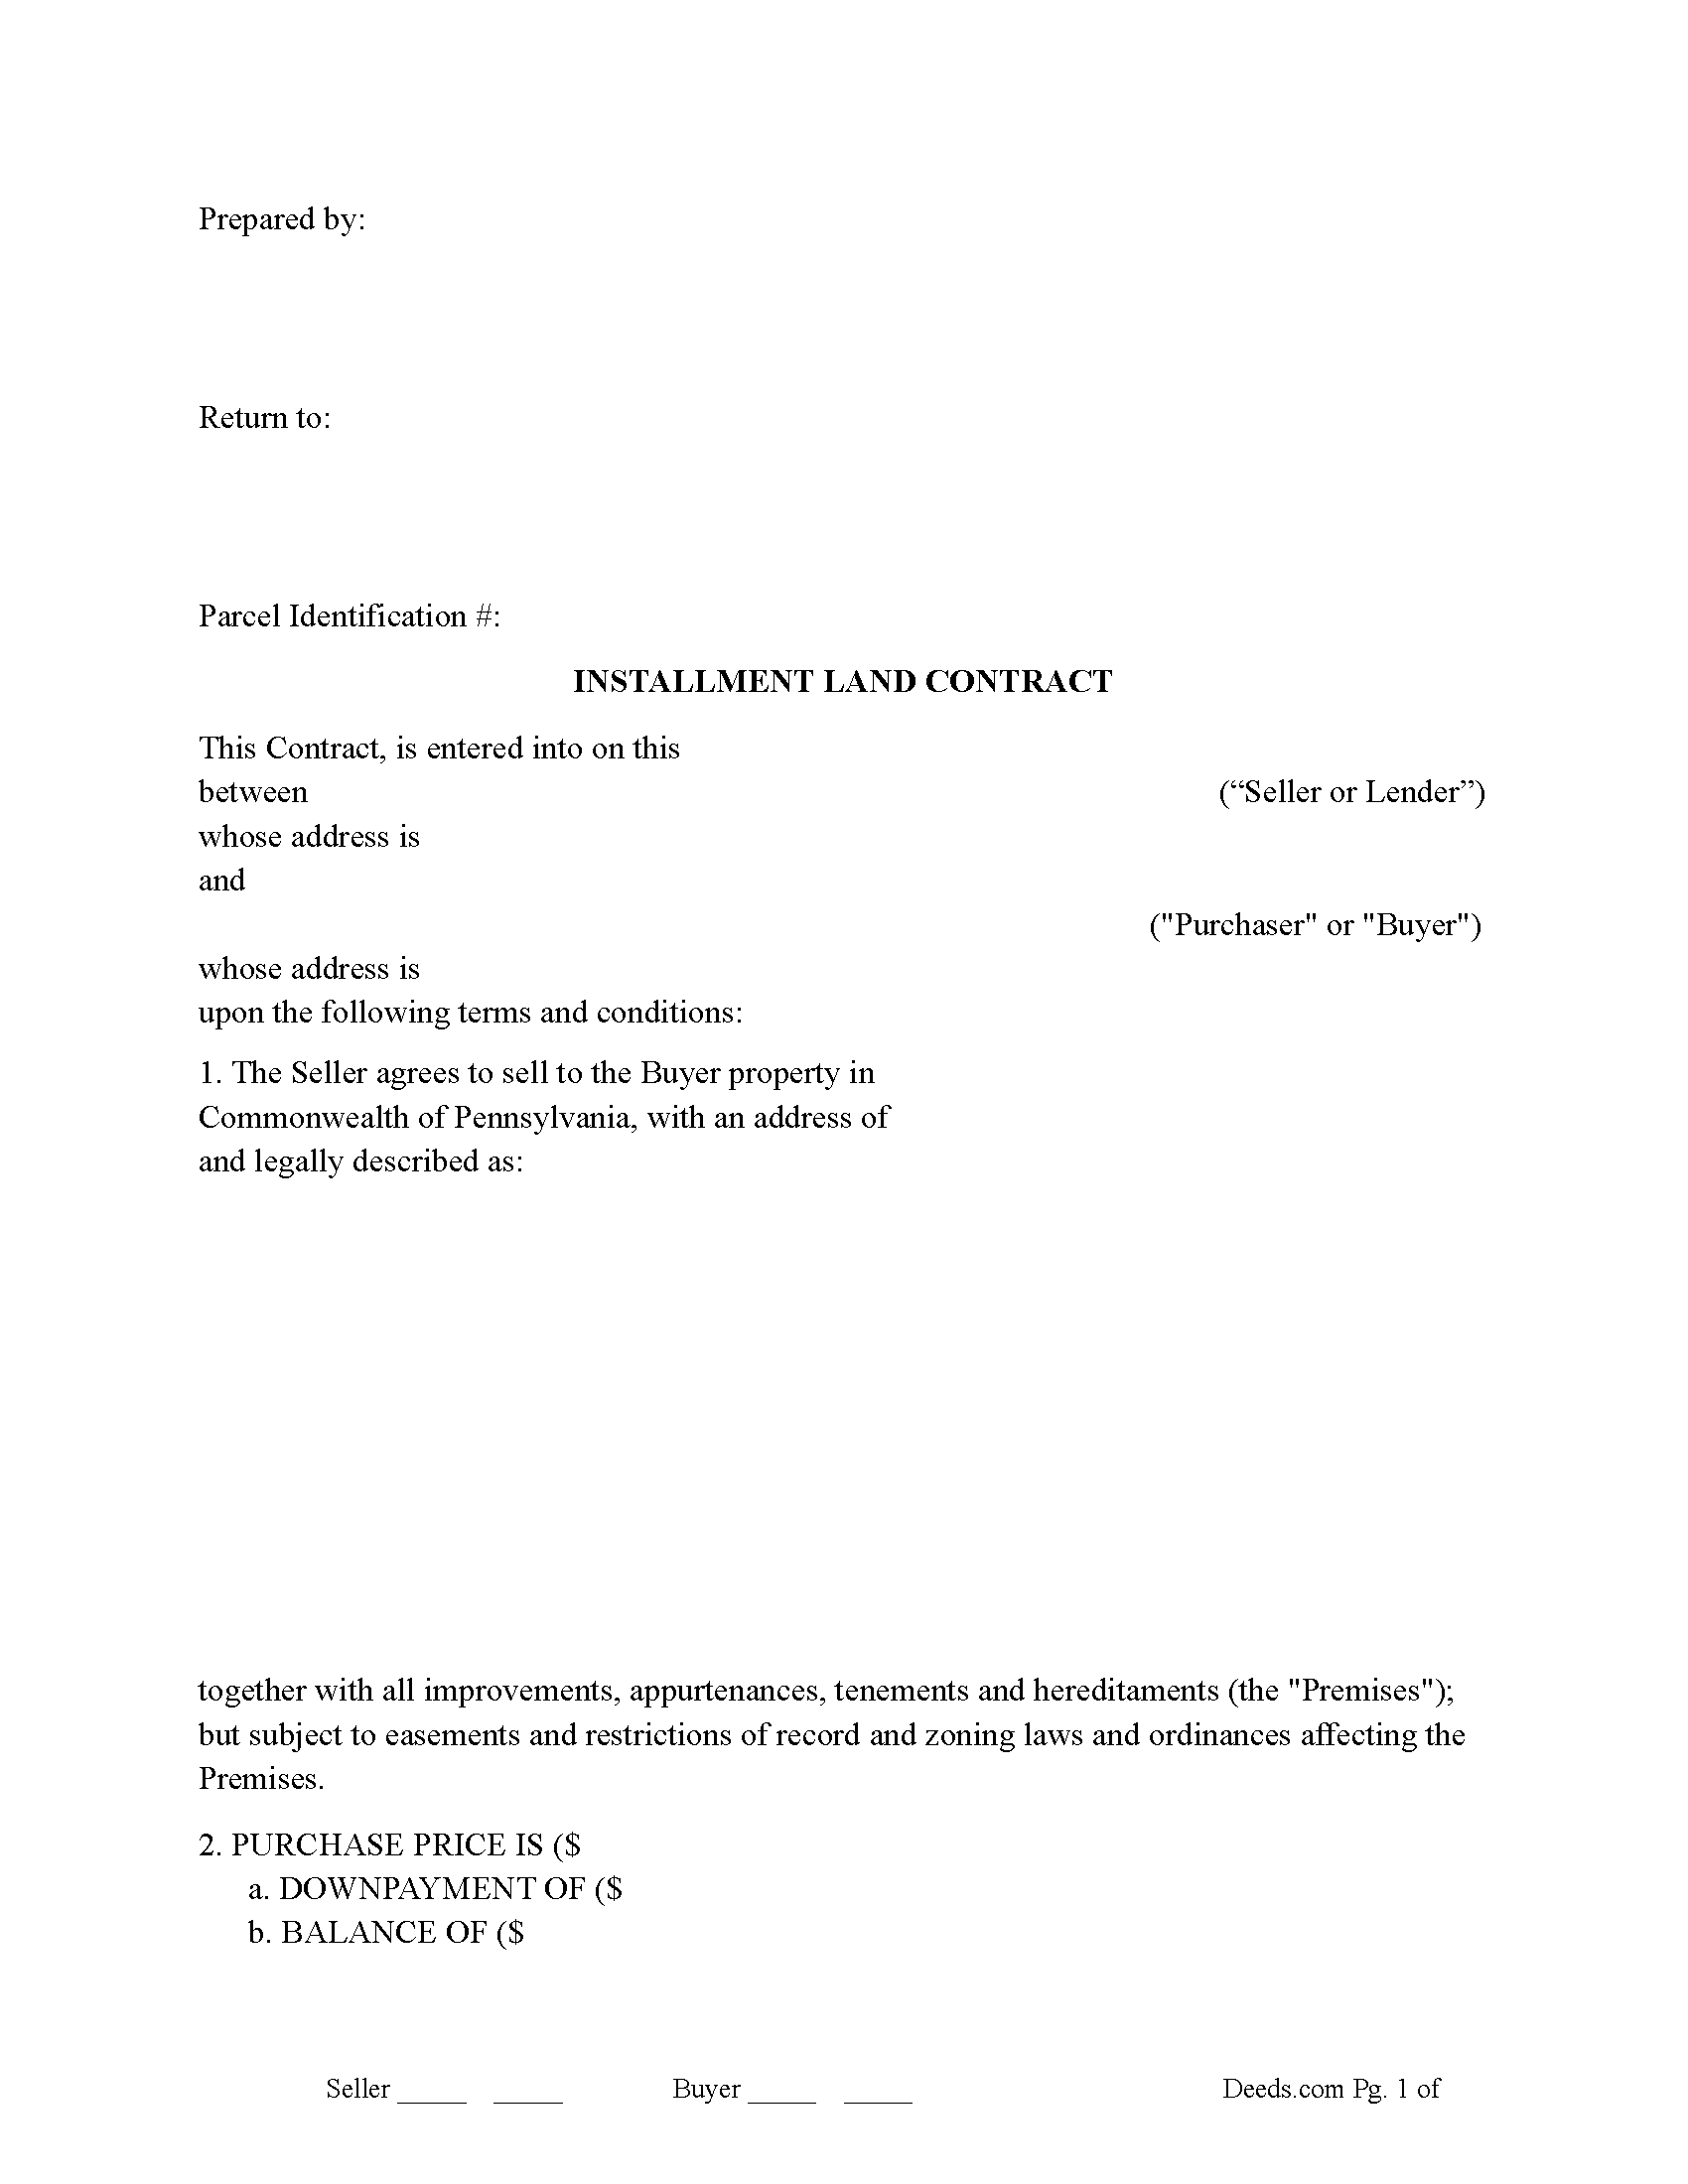 Erie County Installment Land Contract Form